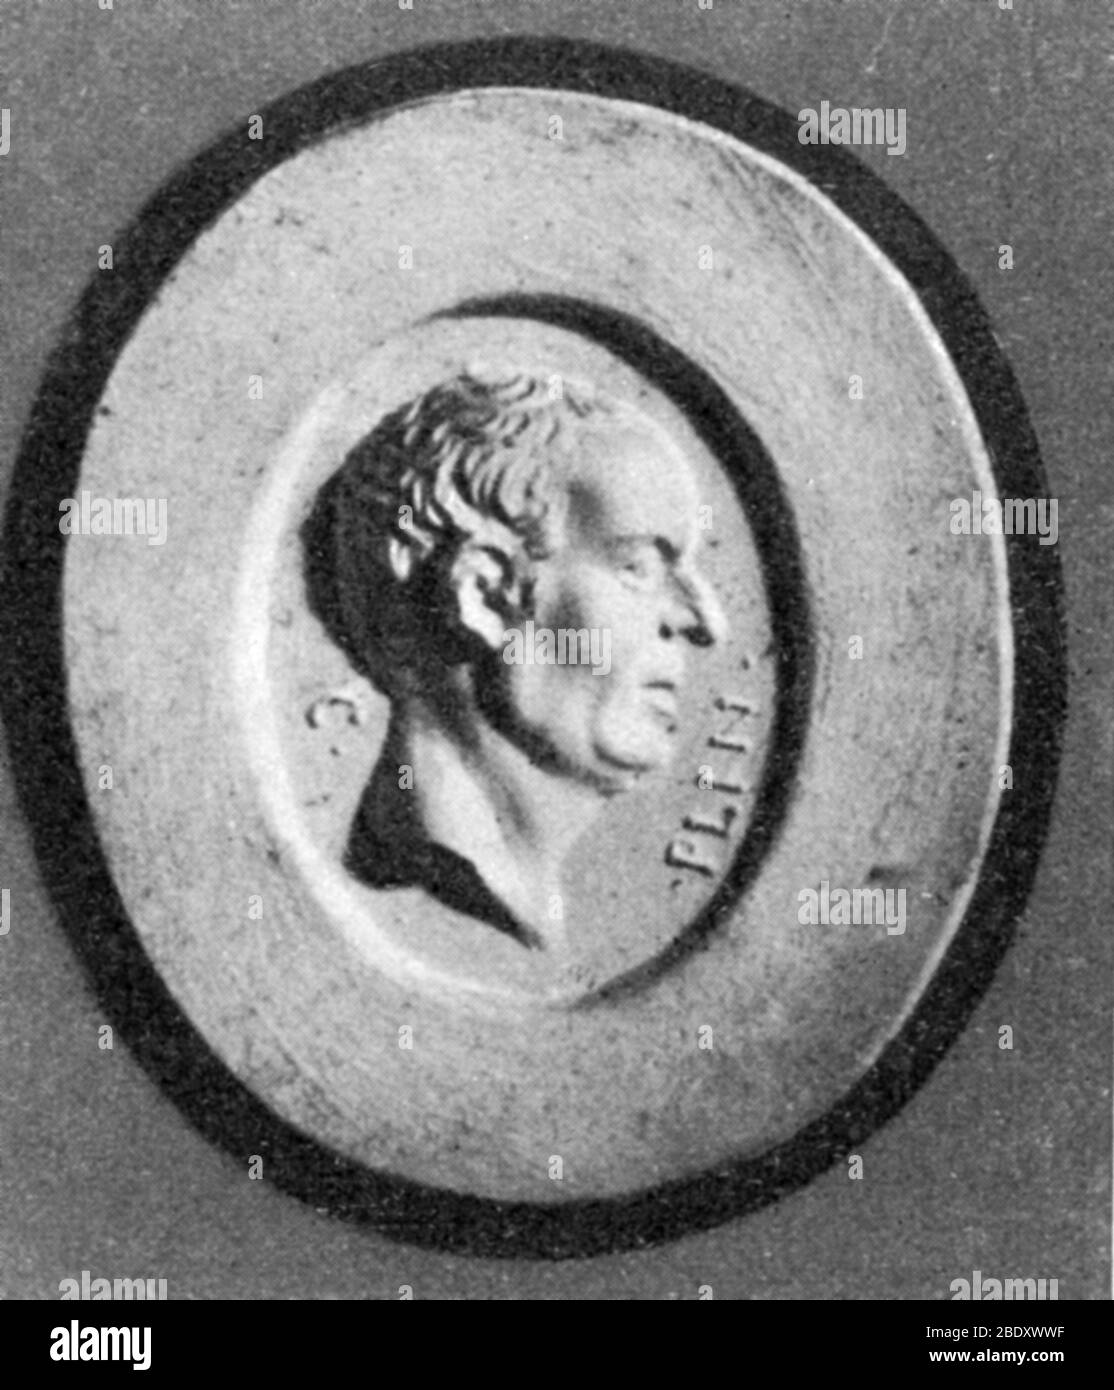 Pliny the Elder, from a Roman cameo. This is the only portrait reputed to be of Pliny, but its identity is disputed, and no confirmed likeness survives. Collection Cades C/211. Gaius Plinius Secundus (23 AD - August 25, AD 79), better known as Pliny the Elder, was a Roman author, naturalist, and natural philosopher, as well as naval and army commander of the early Roman Empire, and personal friend of the emperor Vespasian. Spending most of his spare time studying, writing or investigating natural and geographic phenomena in the field, he wrote an encyclopedic work, Naturalis Historia, which be Stock Photo